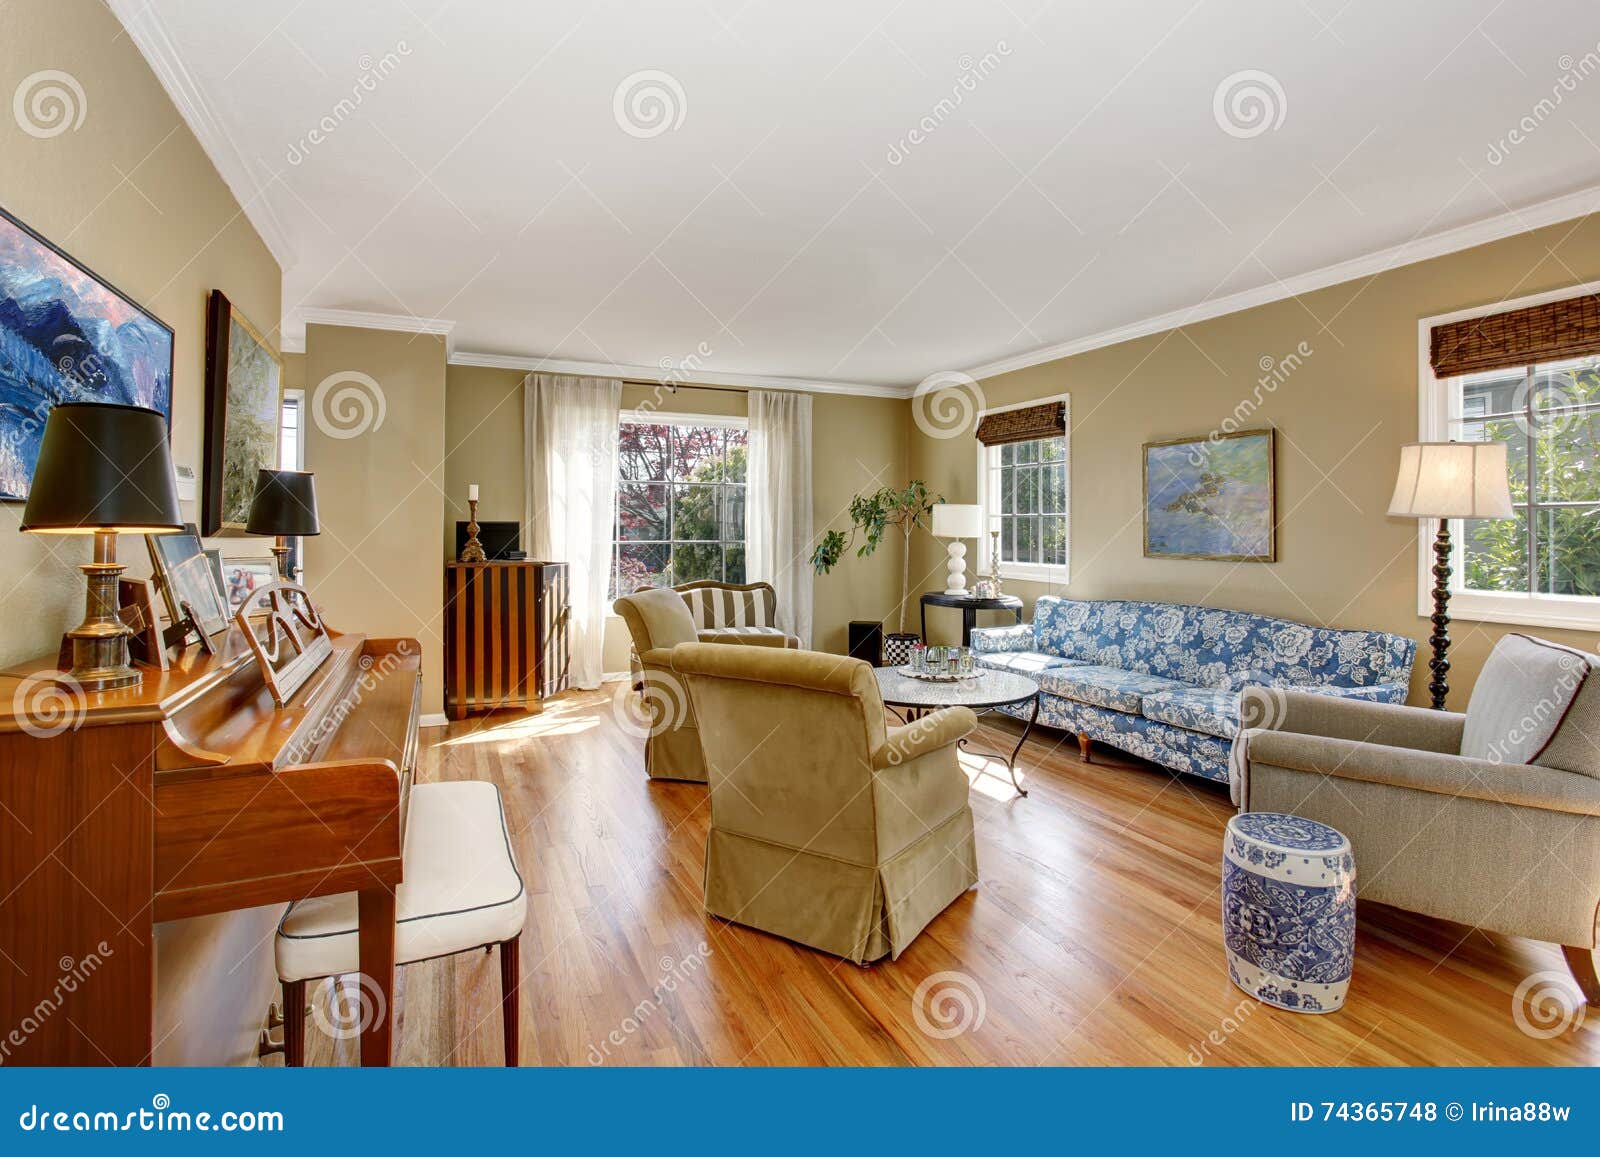 American Living Room Interior With Piano Blue Sofa And Hardwood